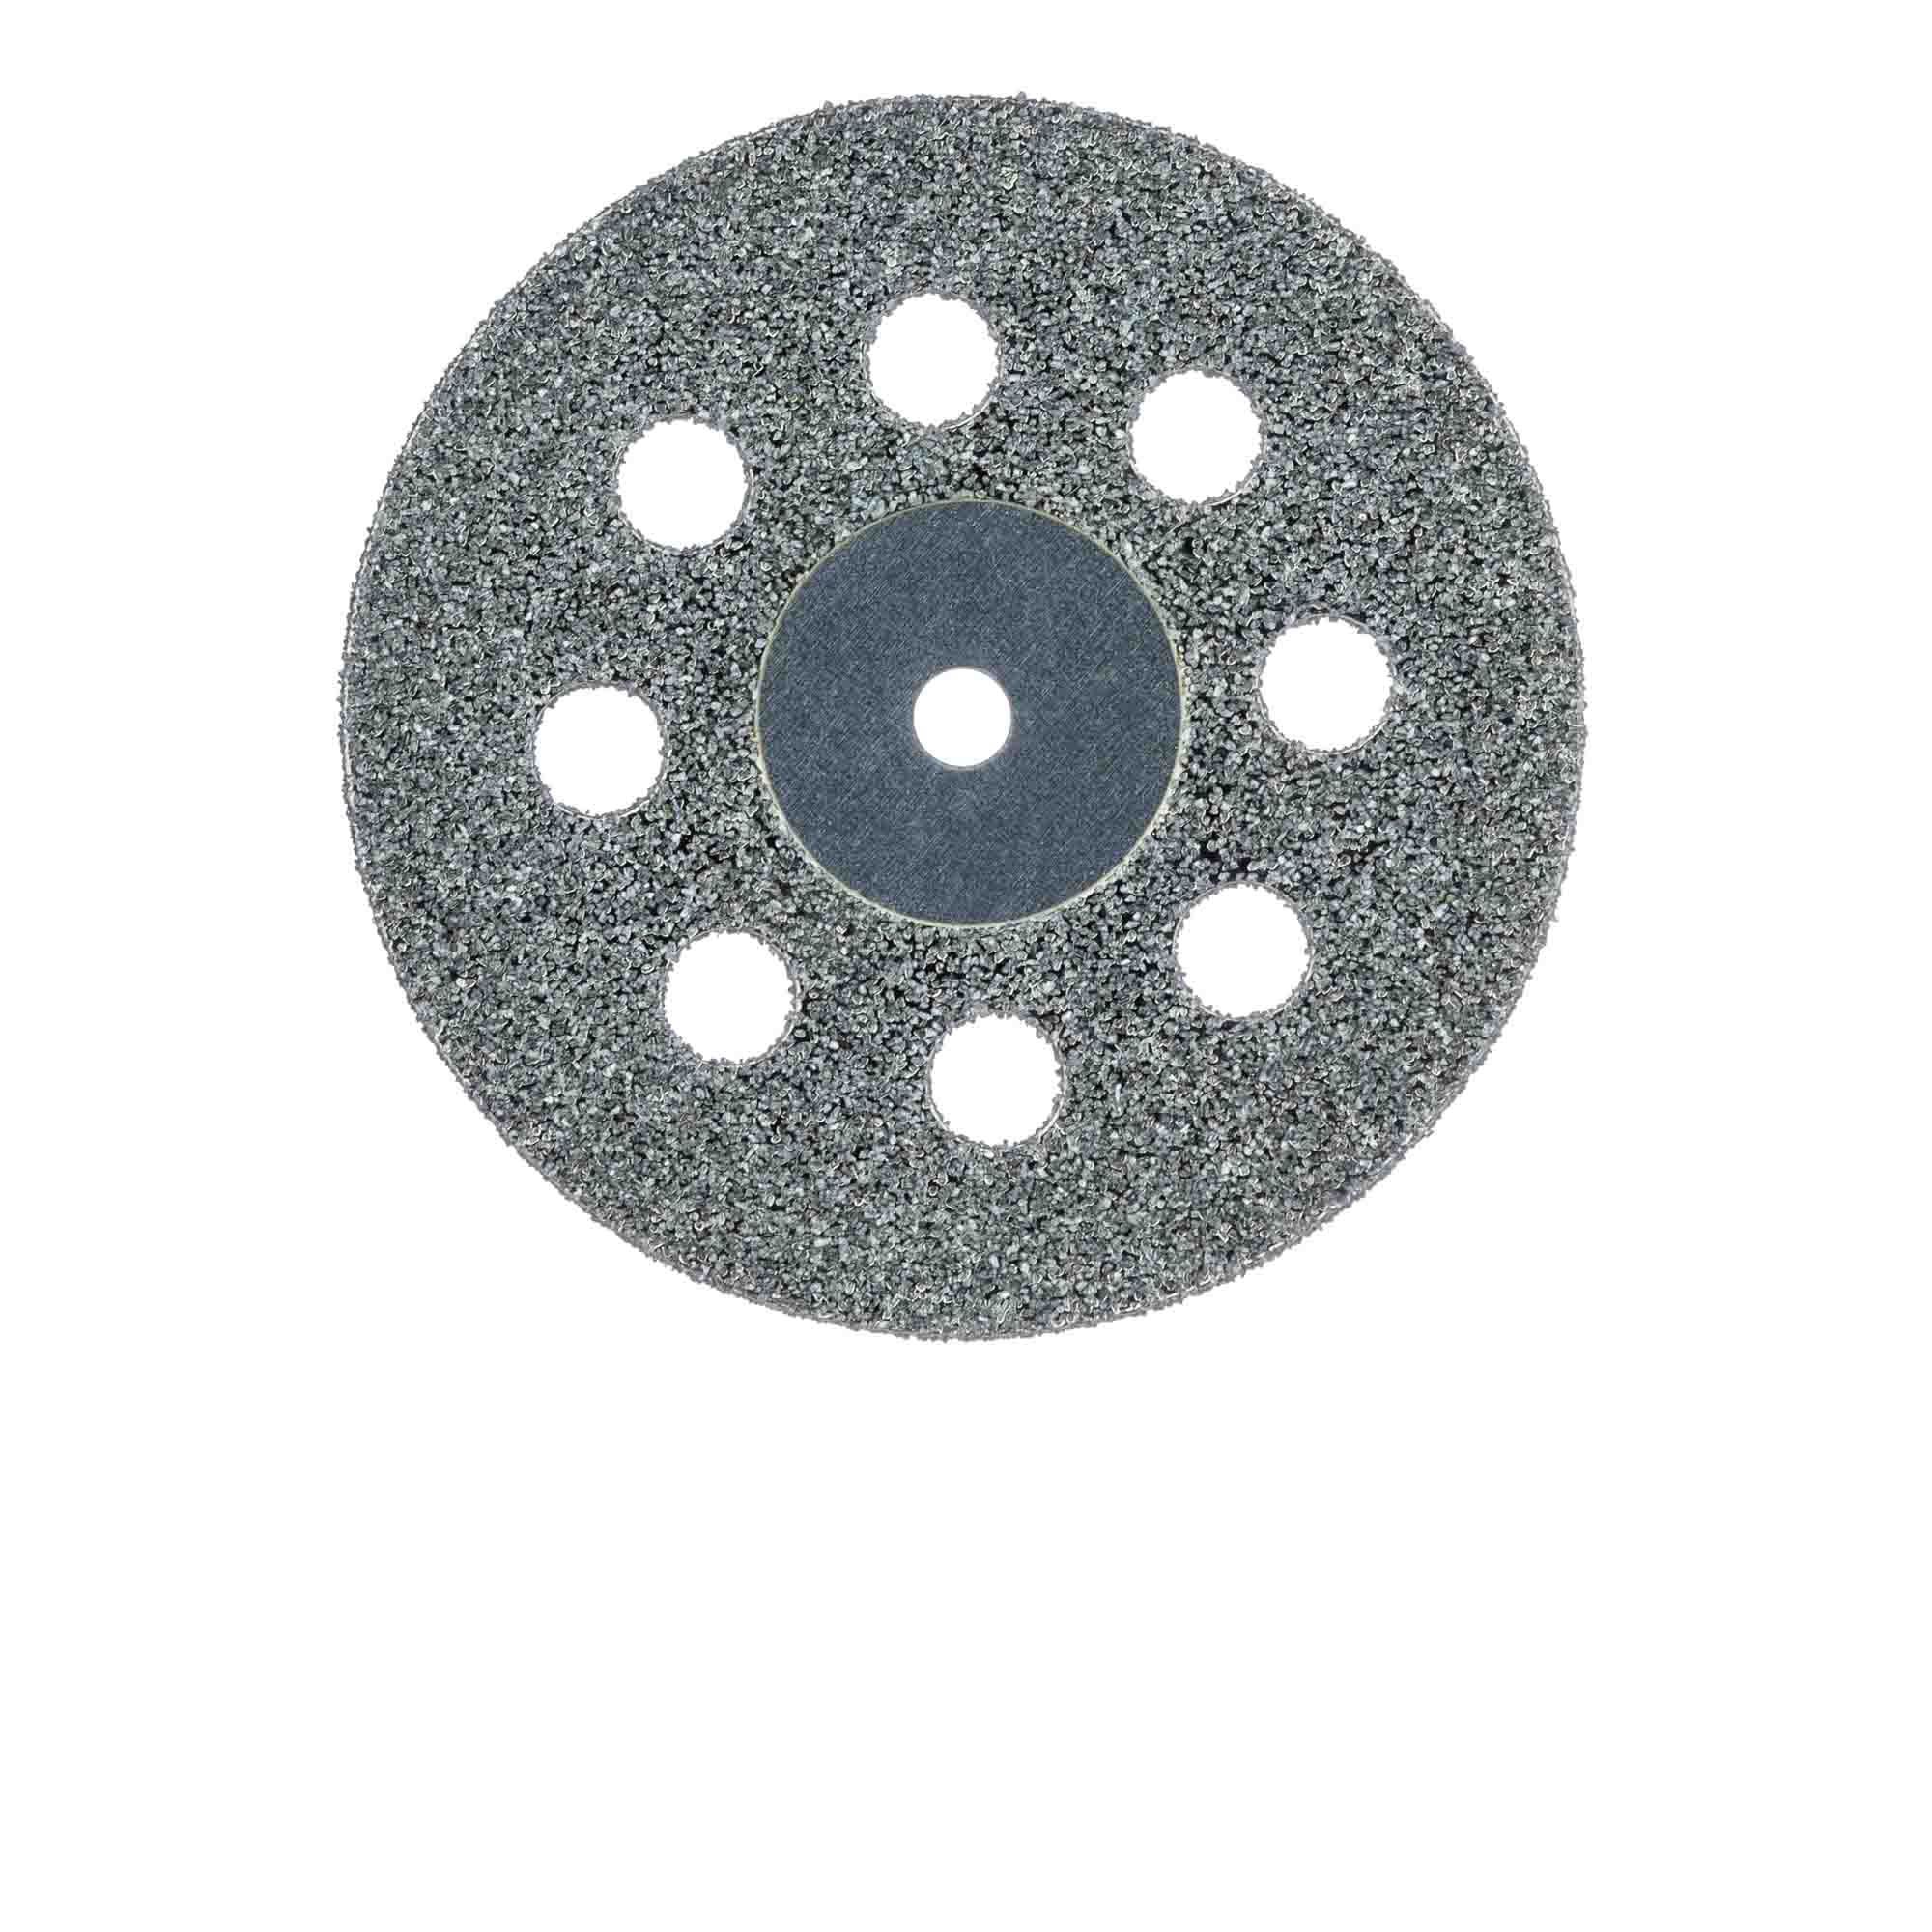 918D-220-HP Diamond Bur, Perforated Disc, Double Sided, 0.5mm Thick, 22mm Ø, HP